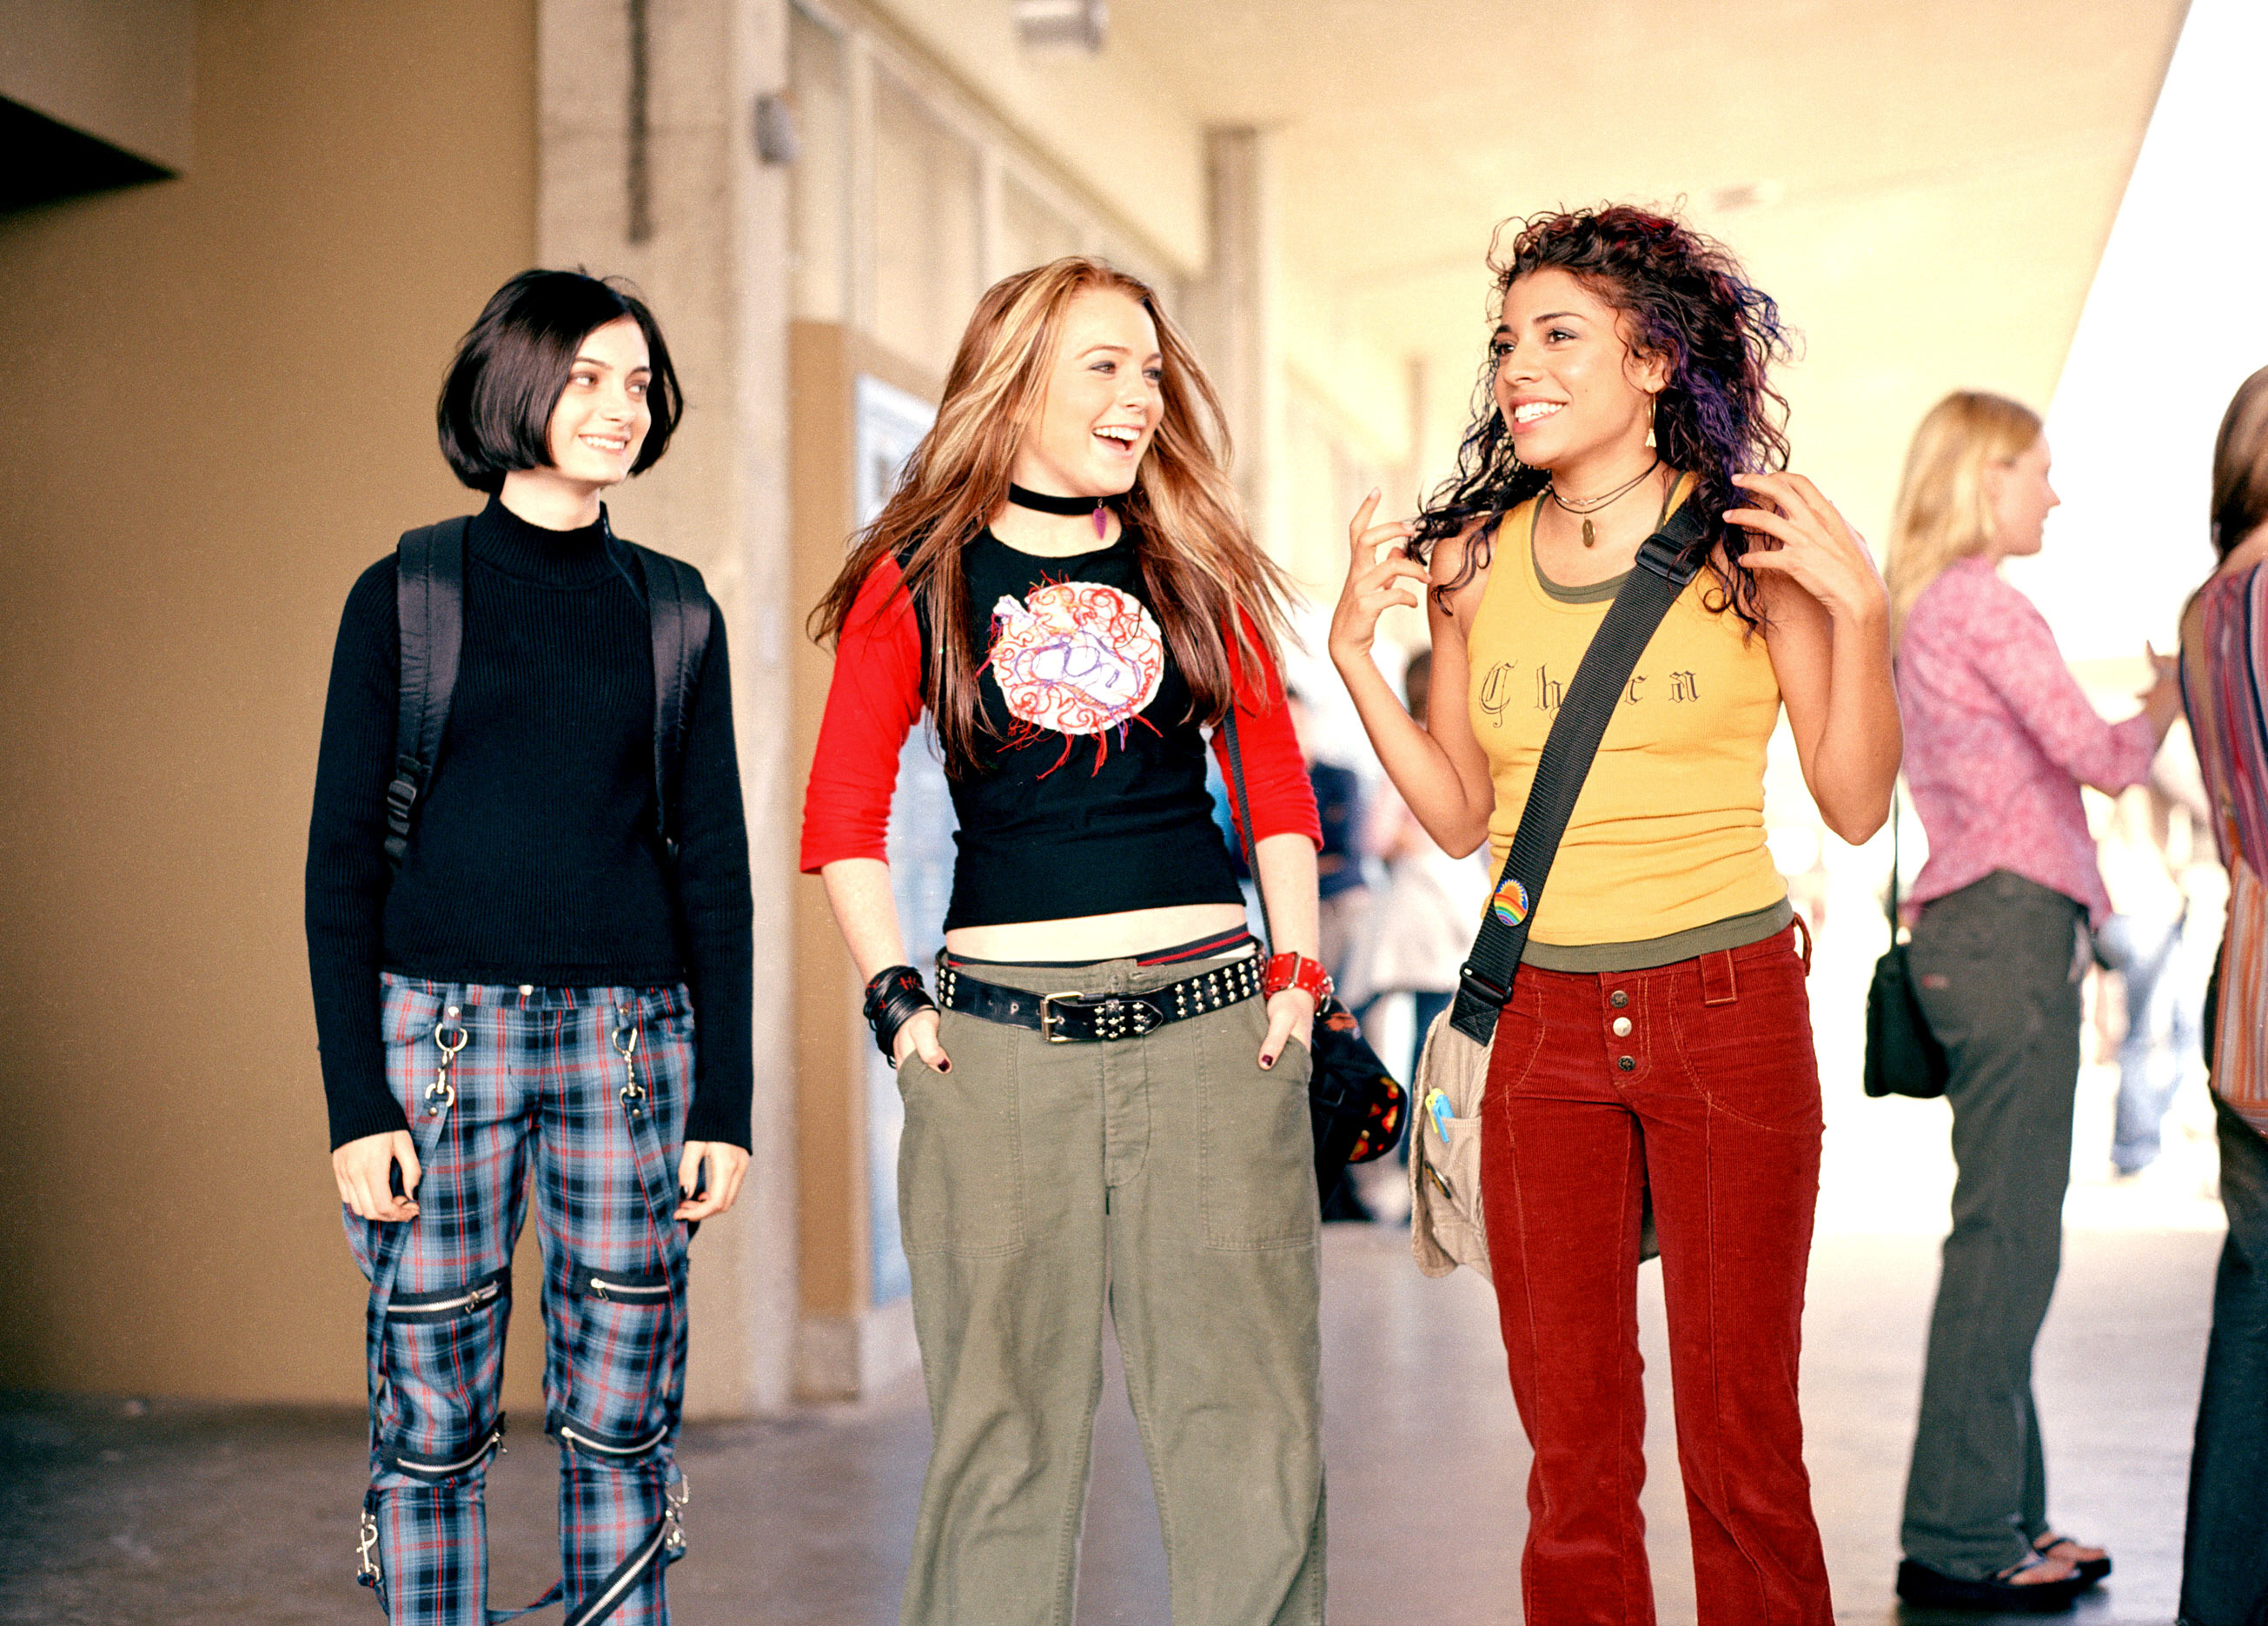 Lindsay Lohan, wearing casual pants and a KISS logo shirt, walks with two friends in casual outfits, smiling and chatting in a hallway in a scene from Freaky Friday